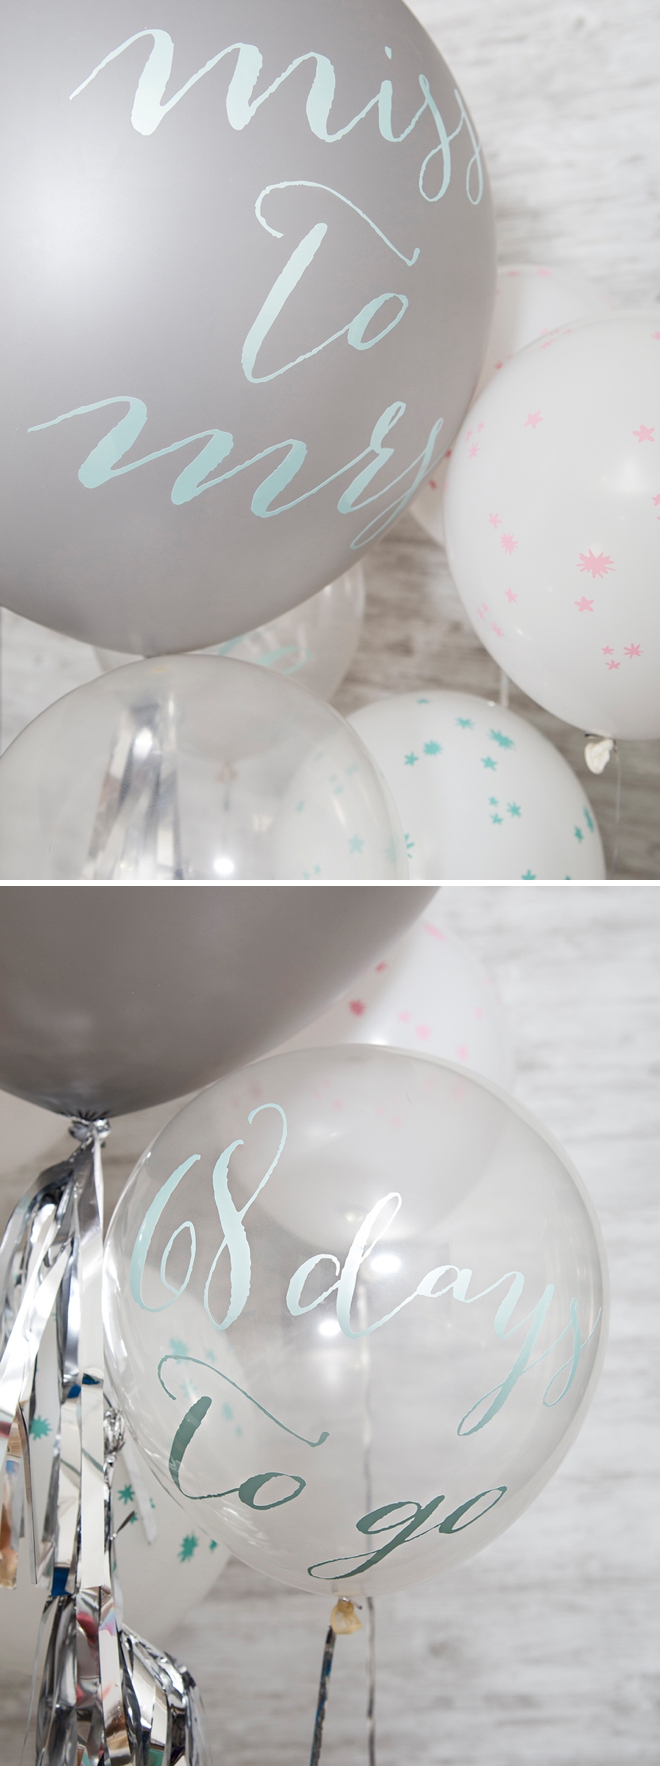 Make your own custom balloon signs using your Cricut and vinyl!